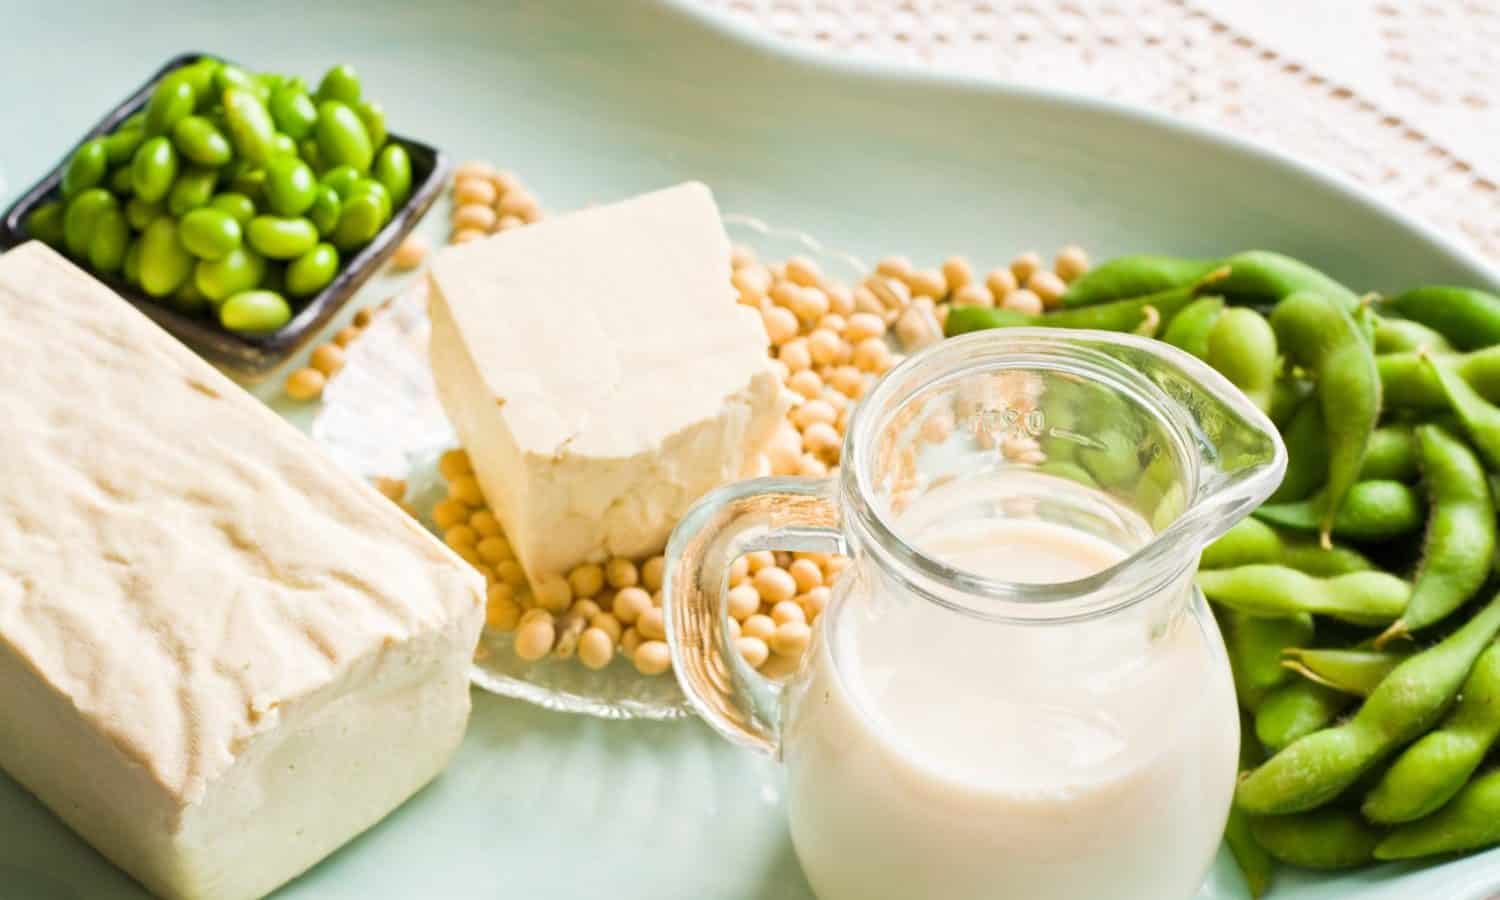 Coalition of plant-based food organizations opposes the “DAIRY PRIDE Act” that would prohibit labeling non-dairy products with dairy-related terms like milk